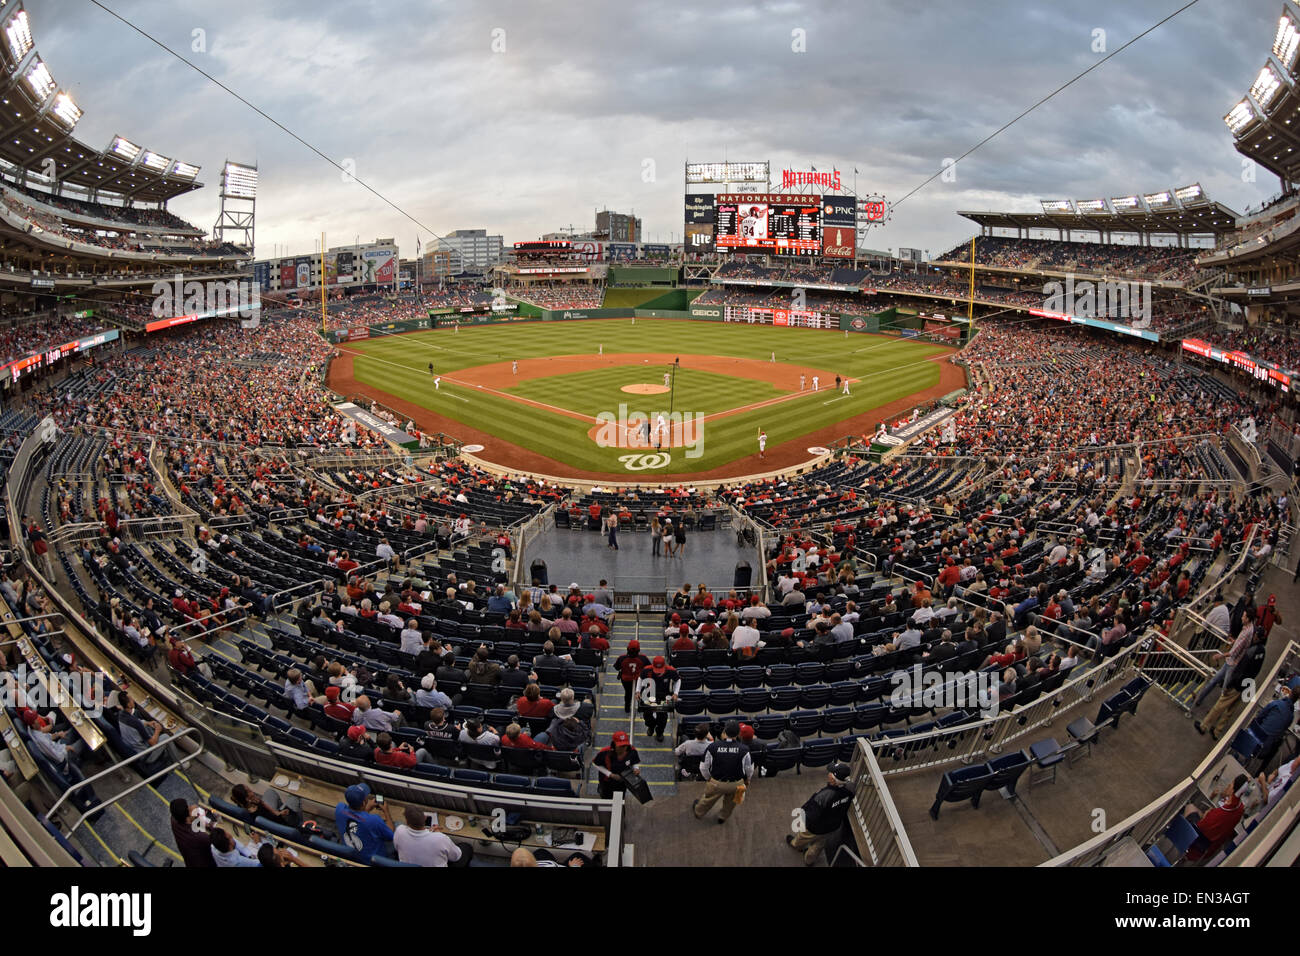 A fisheye lens view of a spring night baseball game at Nationals Park in southeast Washington, D.C.fisheye lens, fisheye lens view. wide view, general Stock Photo